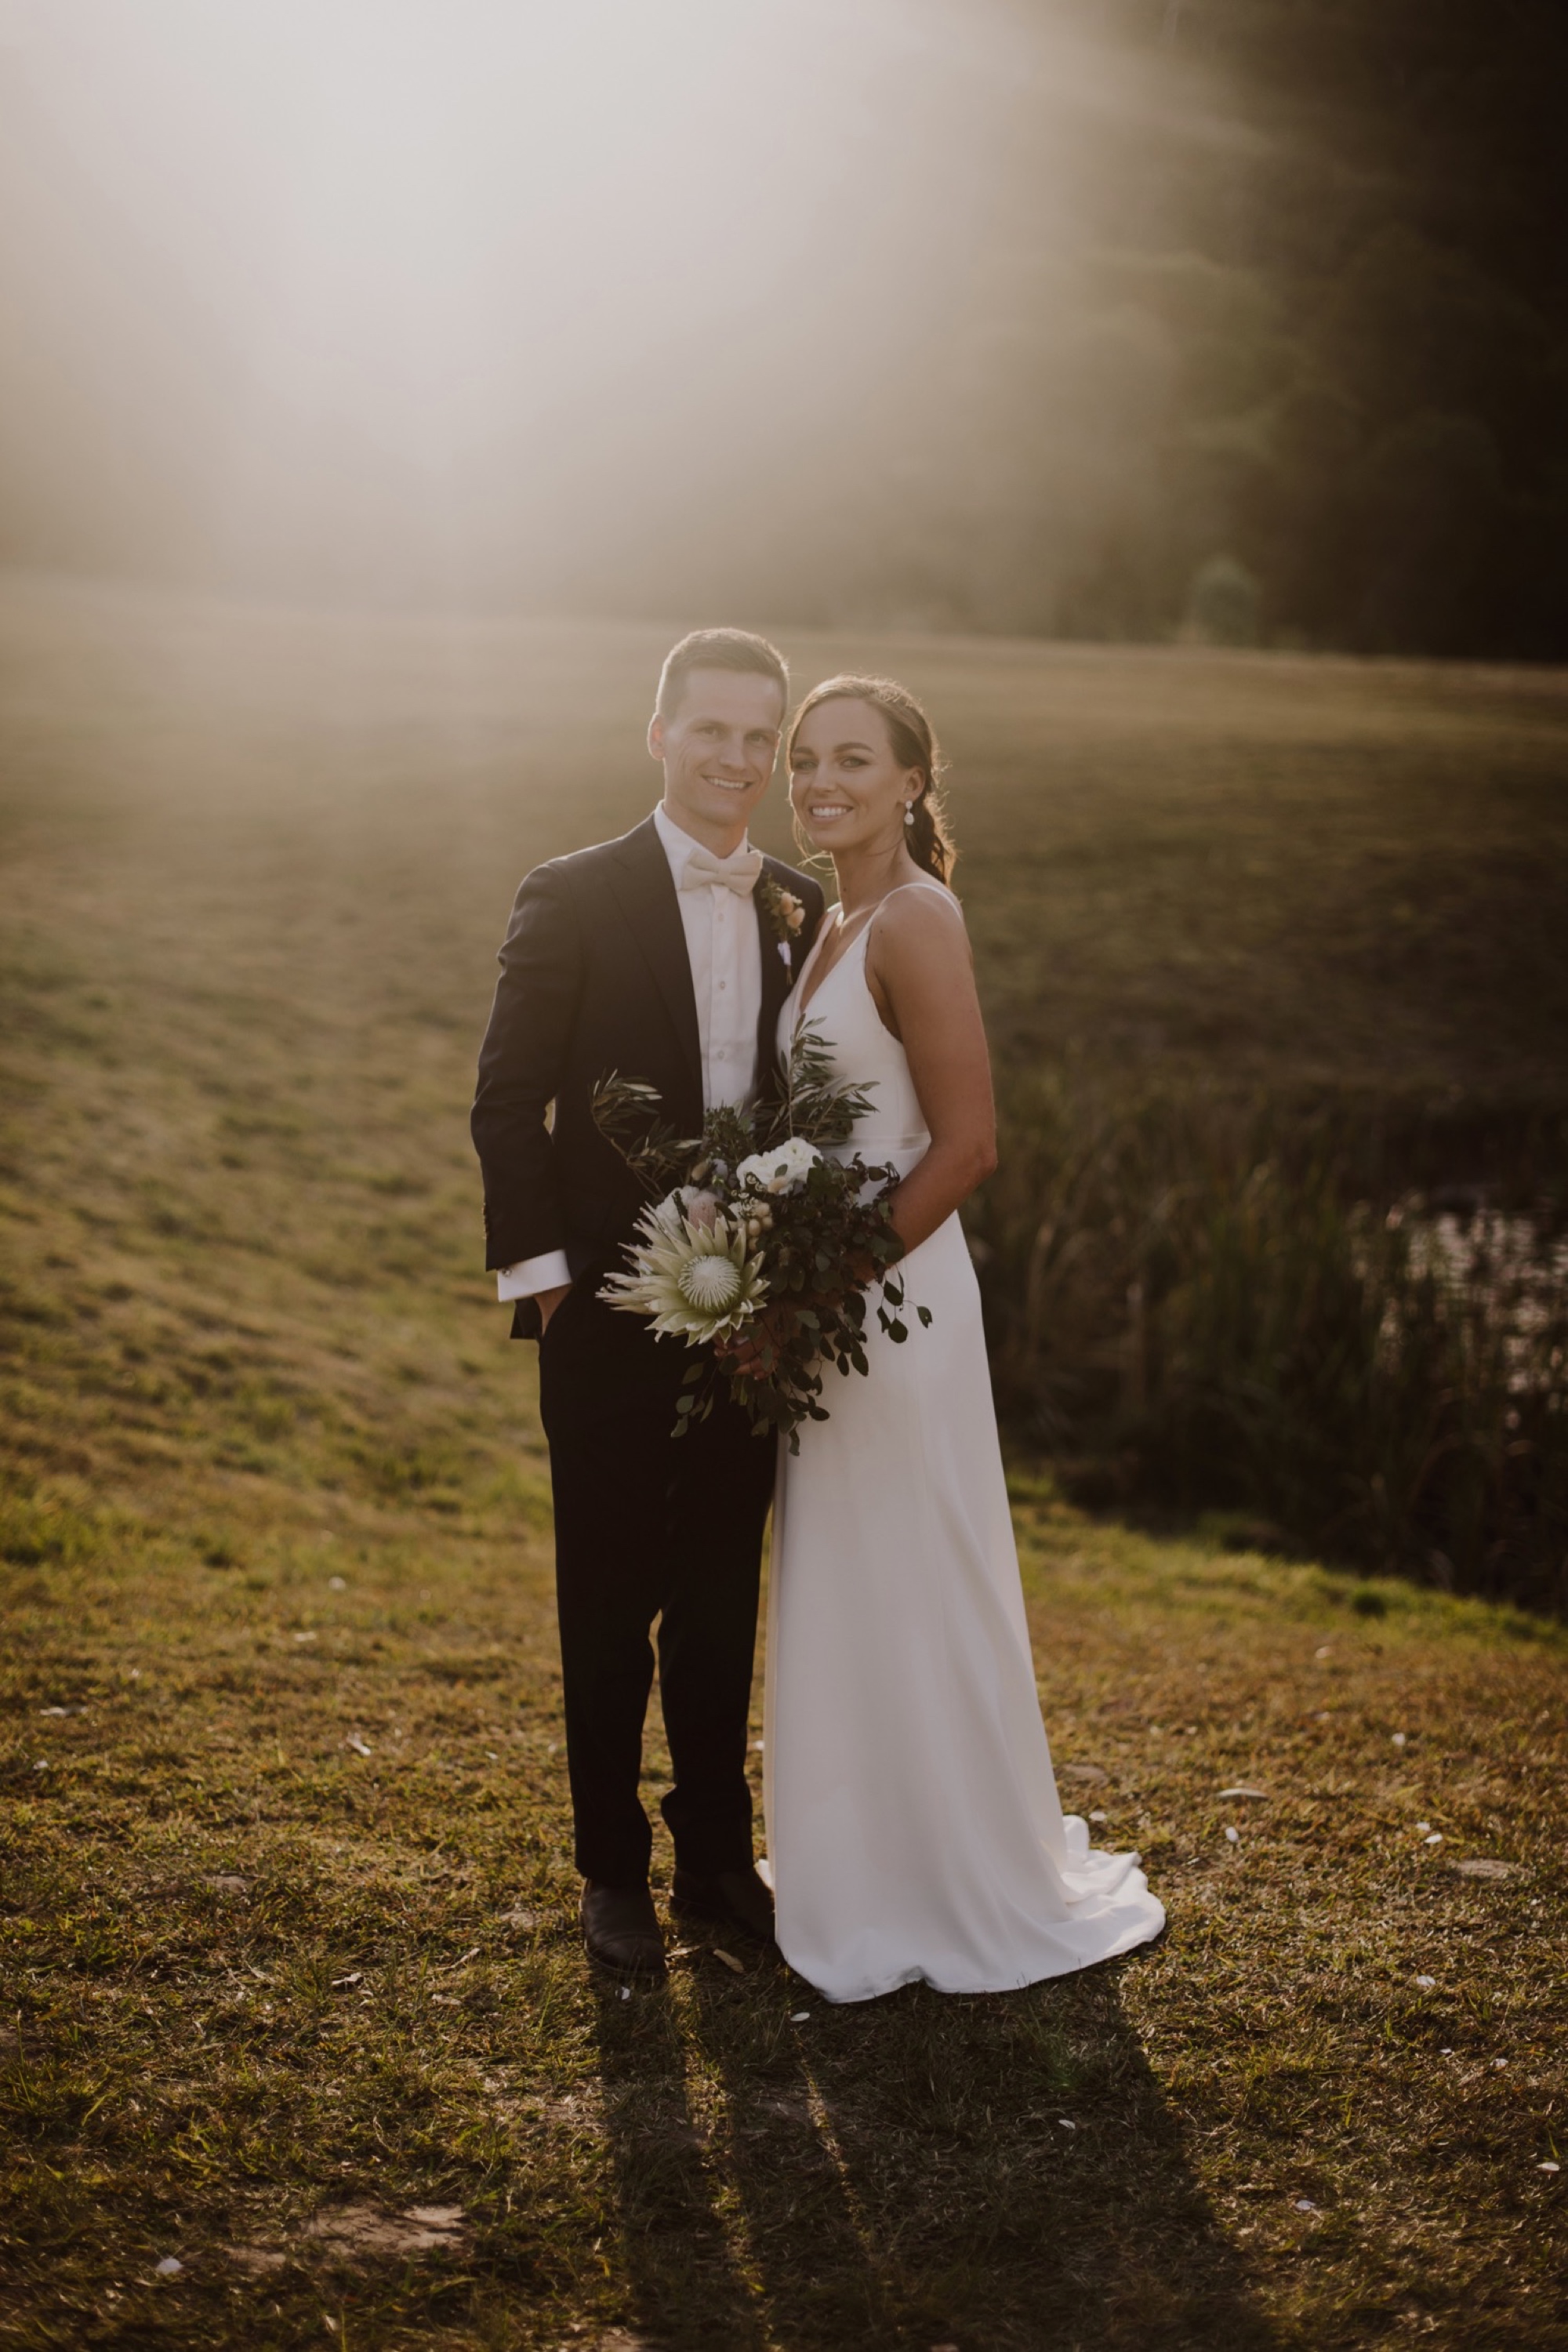 Ethan and Shannen's Gold Coast Wedding